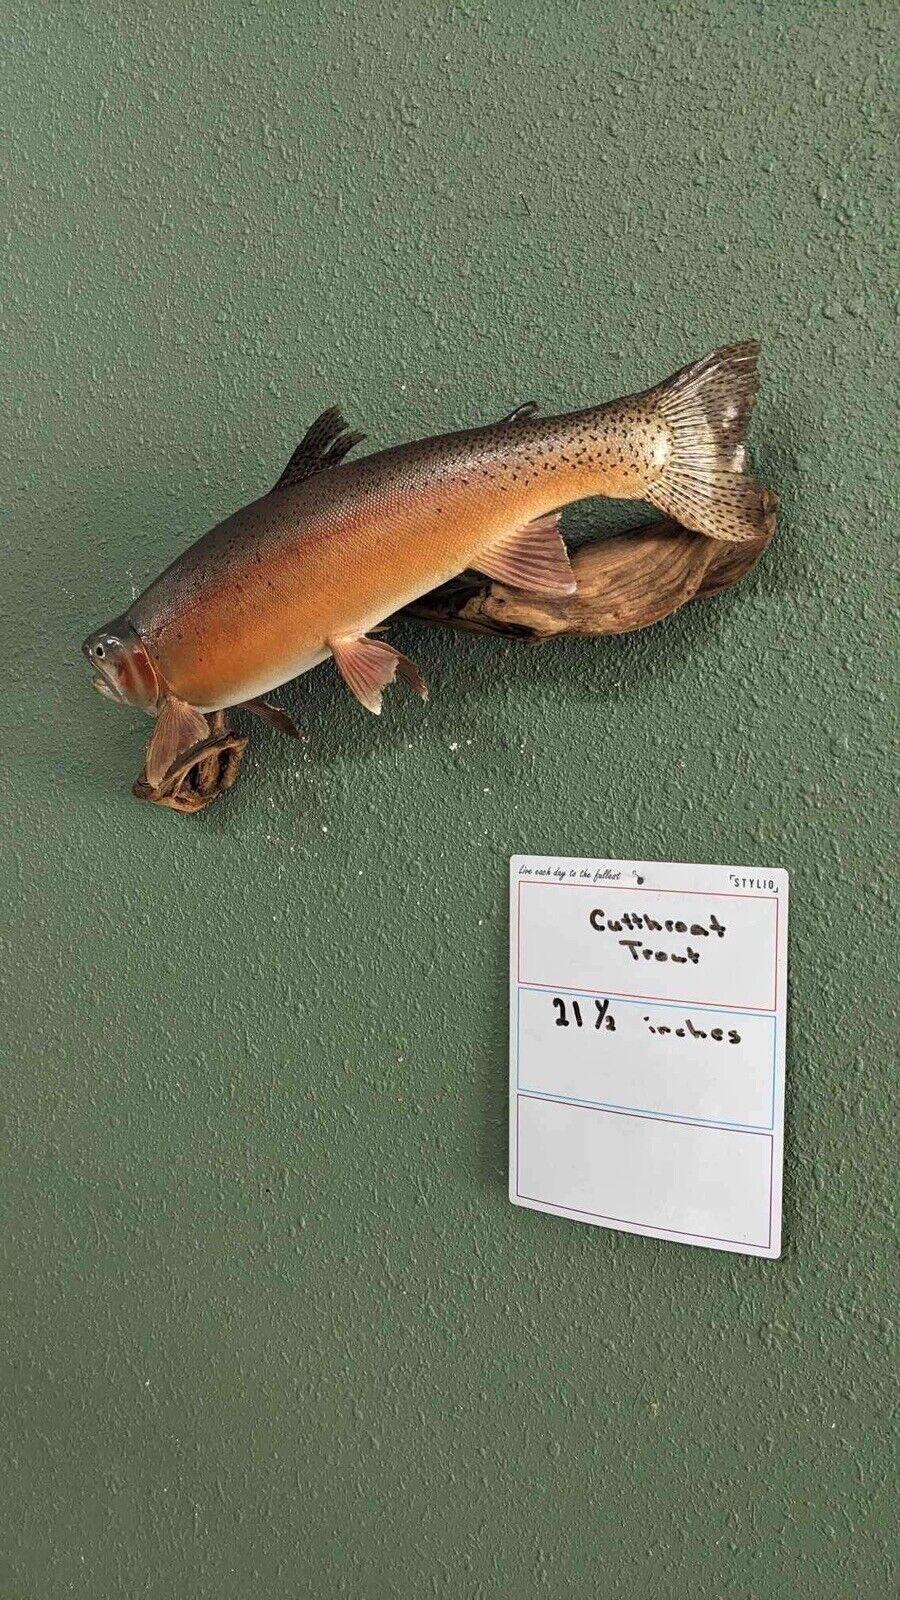 Beautiful Real Skin 21.5” Cutthroat Trout Taxidermy Mount